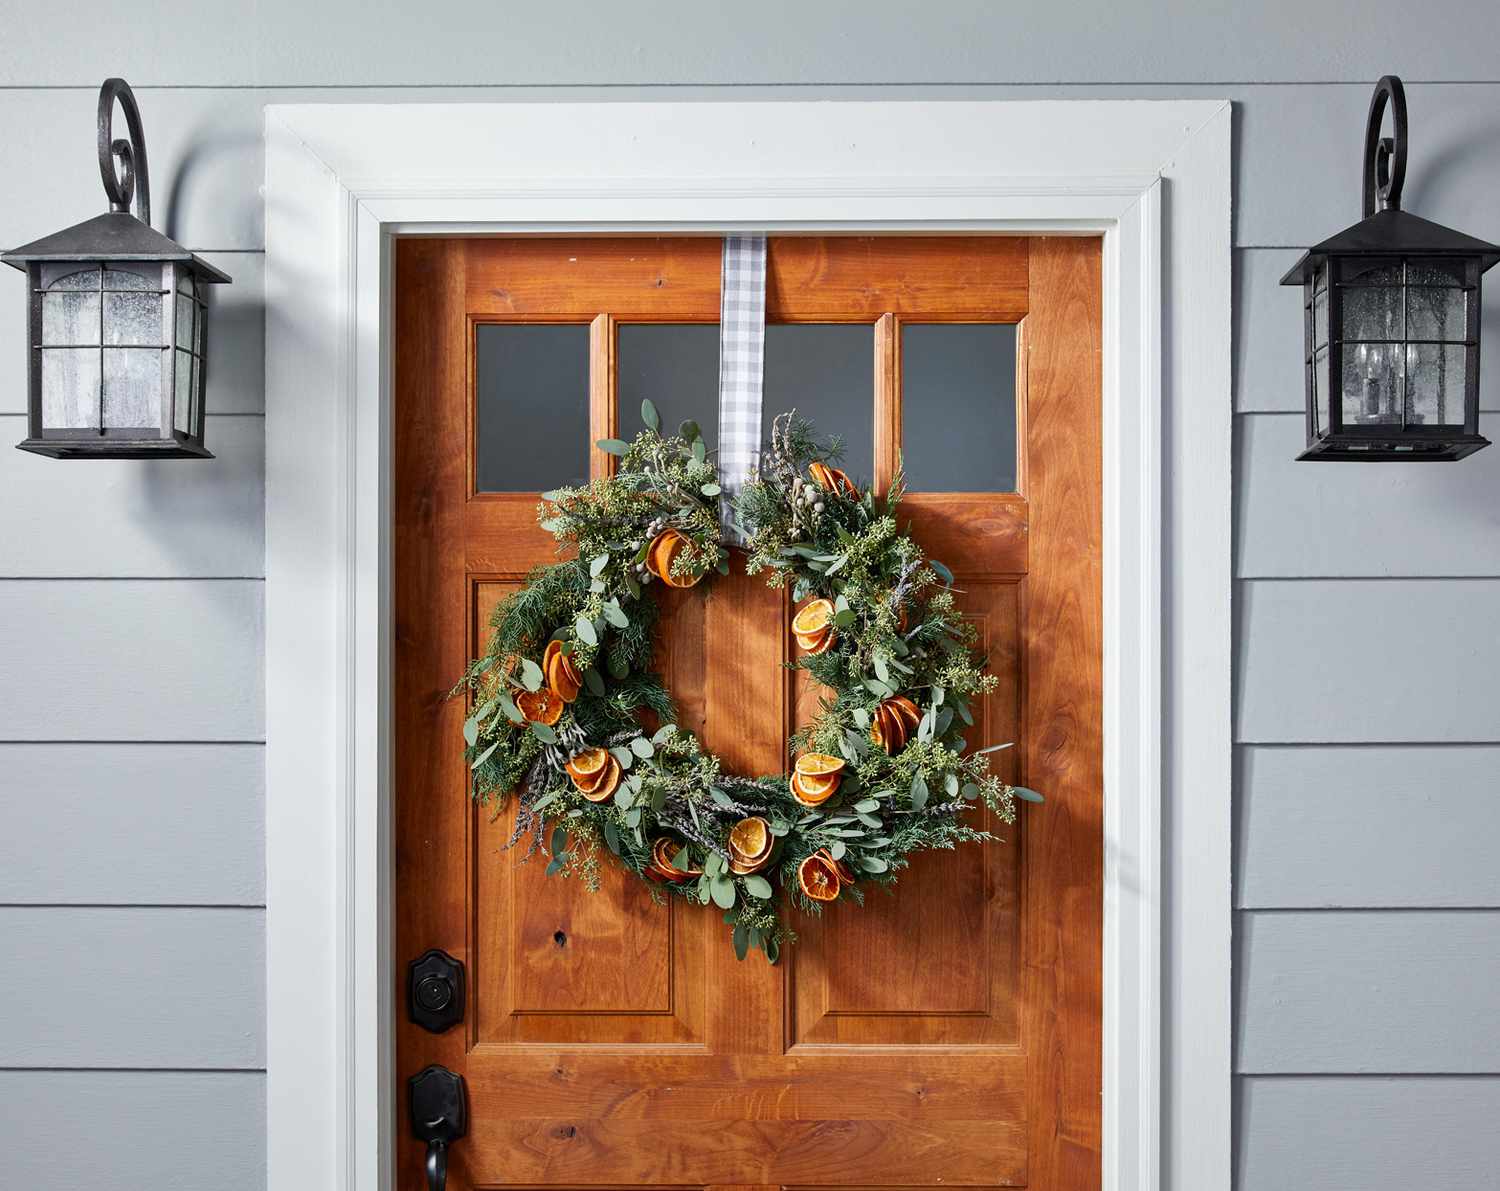 Christmas Wreath Ideas: 30 Holiday Wreaths For Doors And More